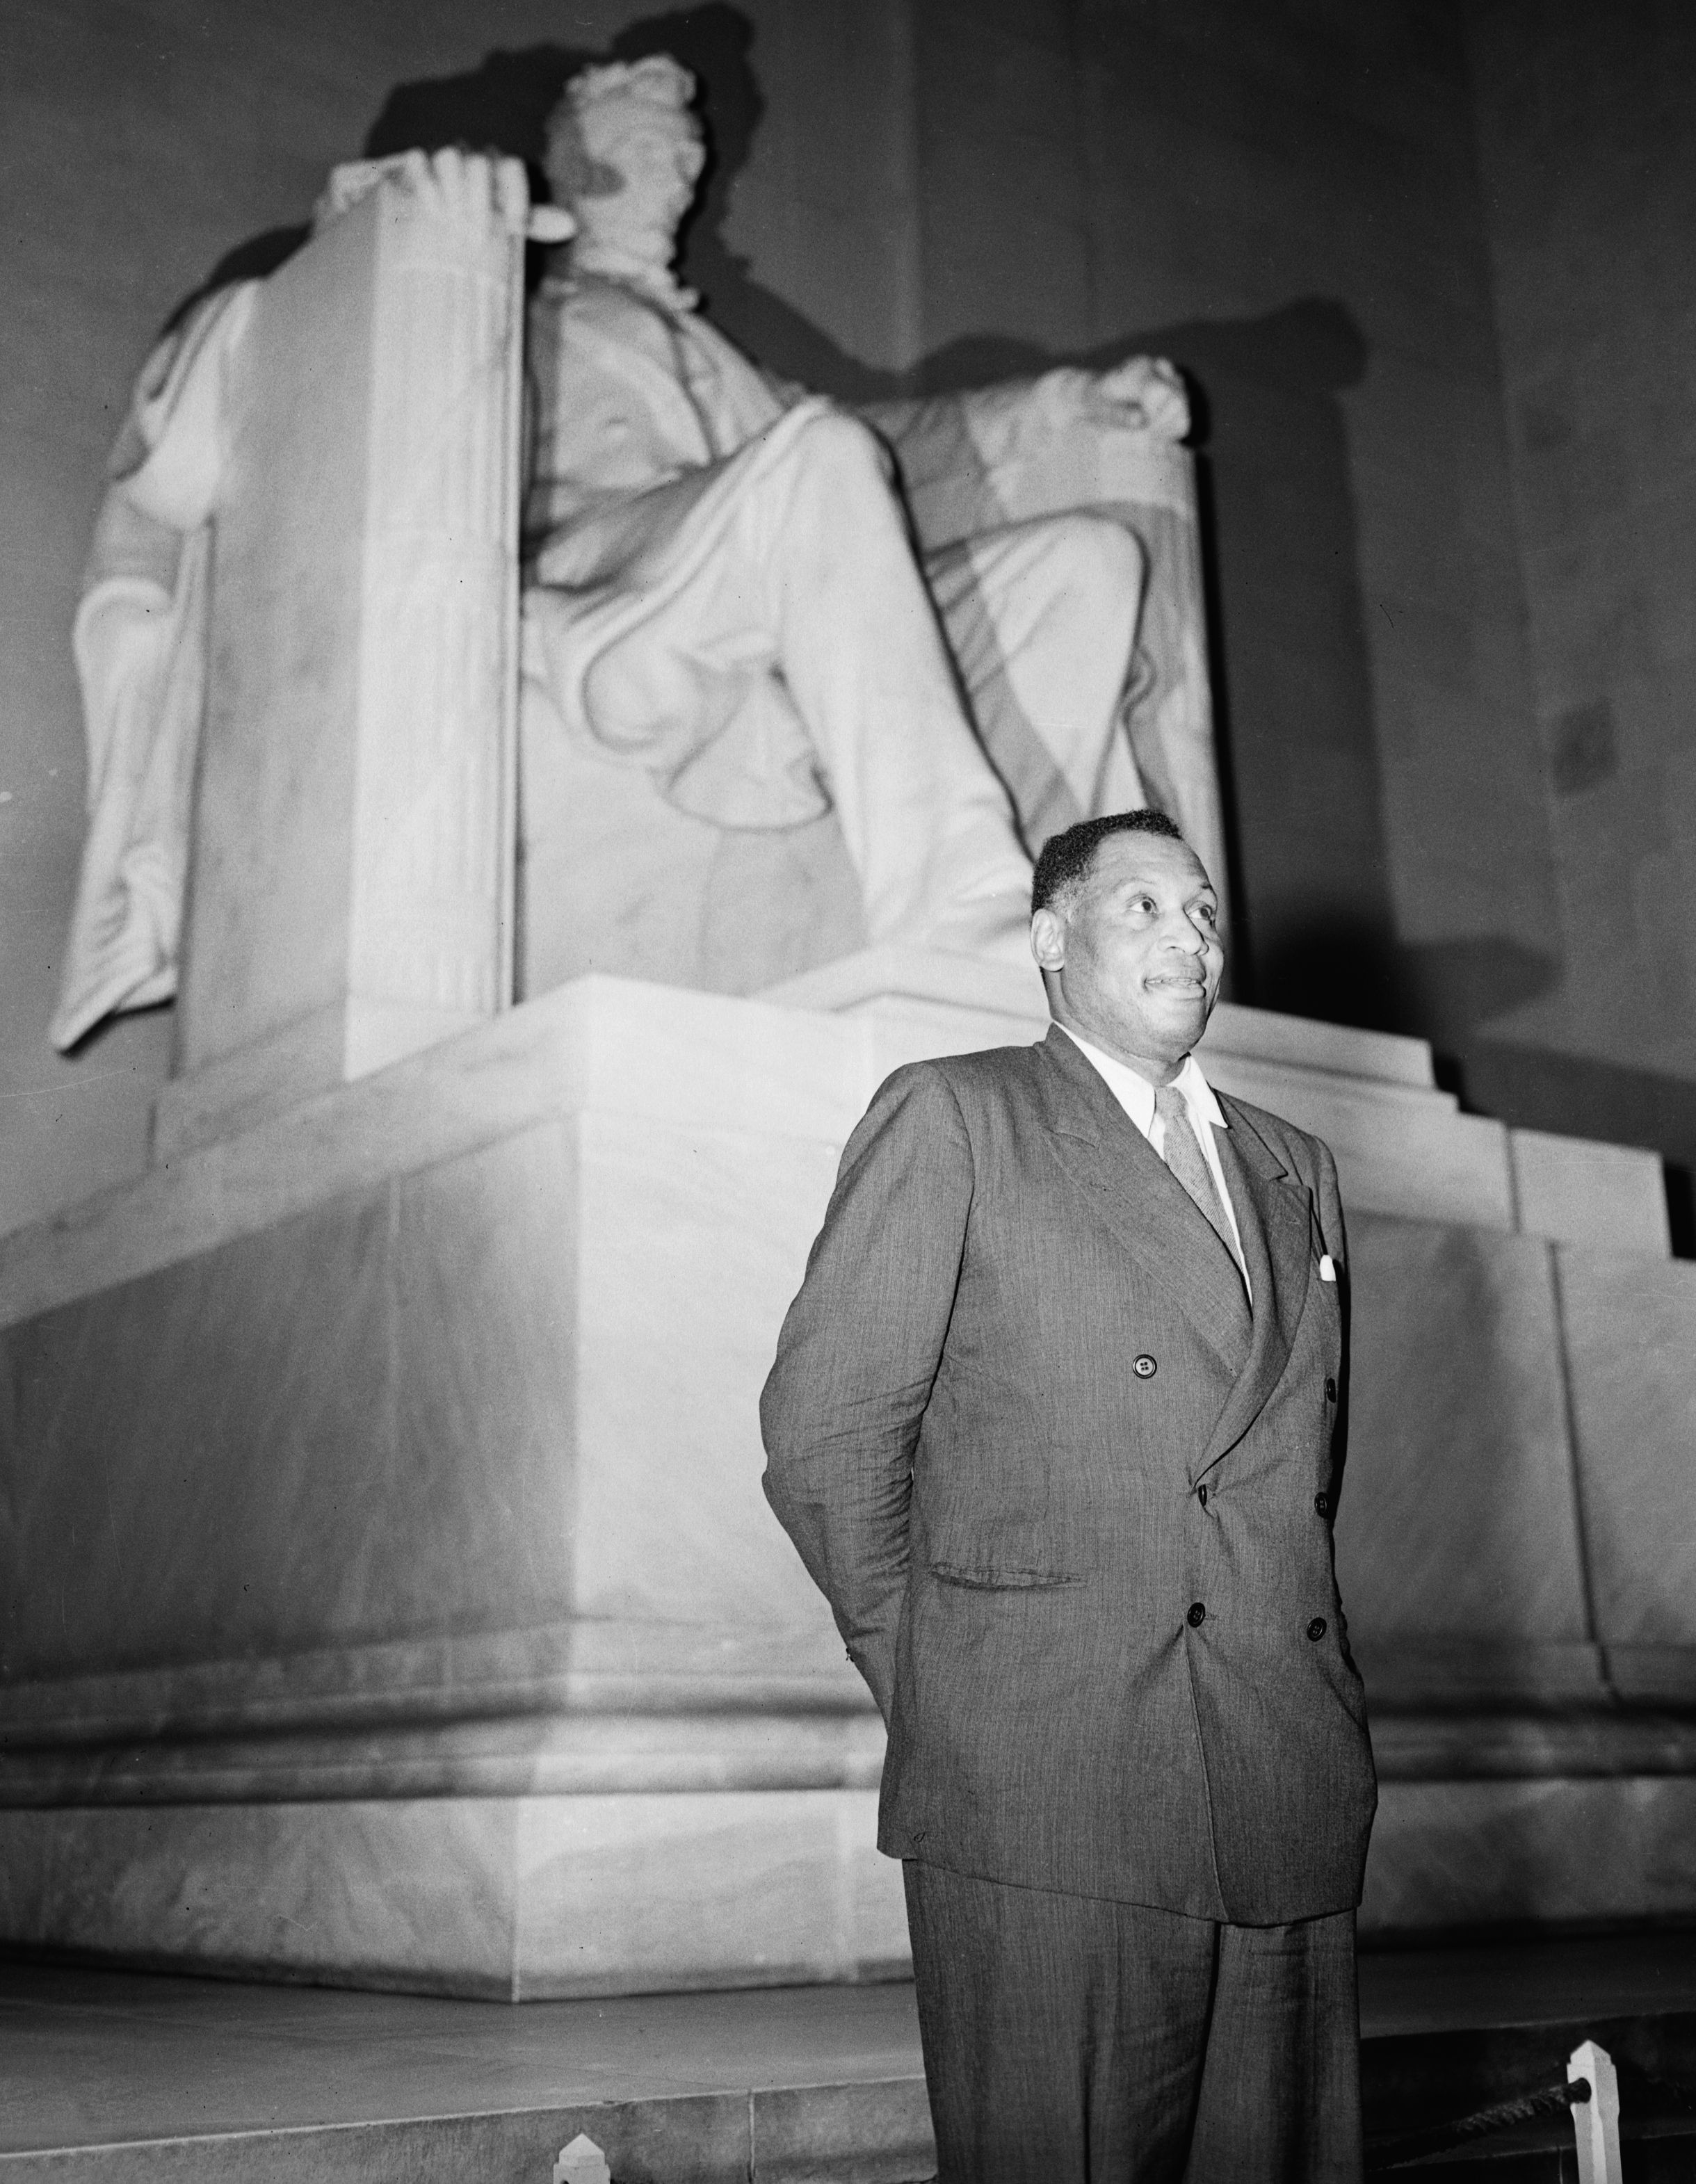 Singer and actor Paul Robeson stands before the statue of Abraham Lincoln in the Lincoln Memorial.